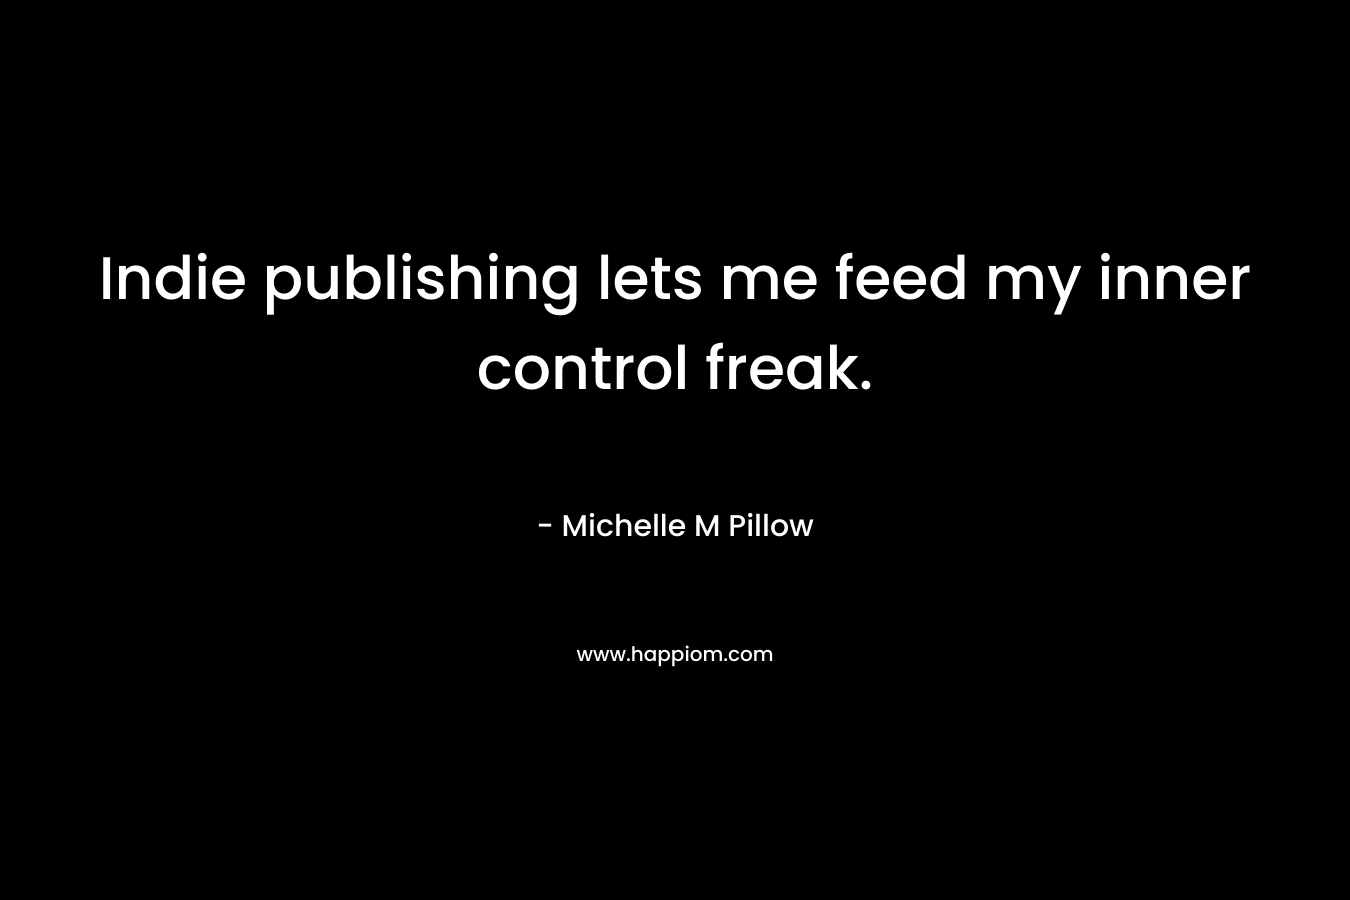 Indie publishing lets me feed my inner control freak. – Michelle M Pillow